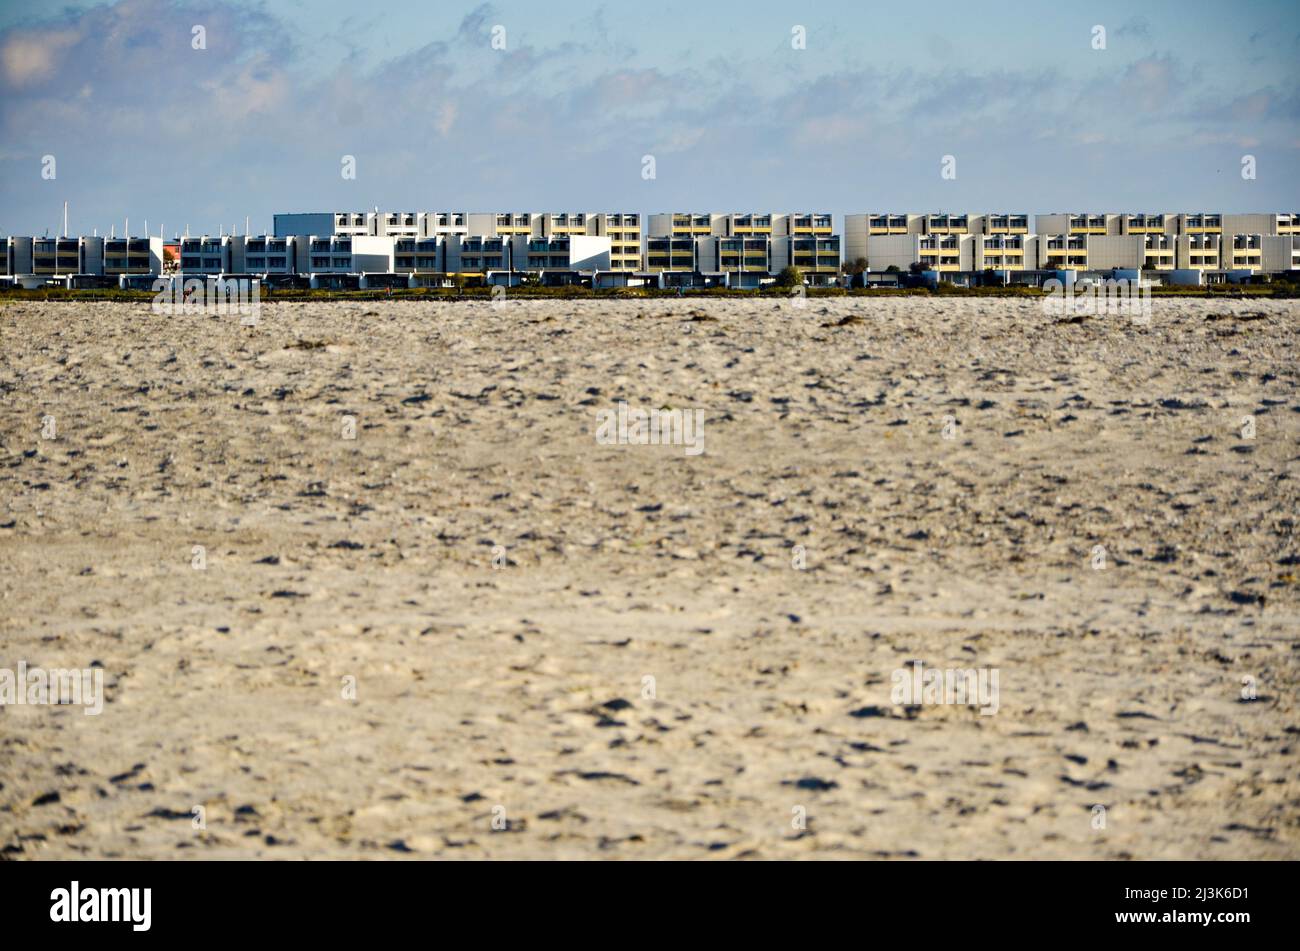 extensive sandy beach with holiday apartments on the horizon Stock Photo